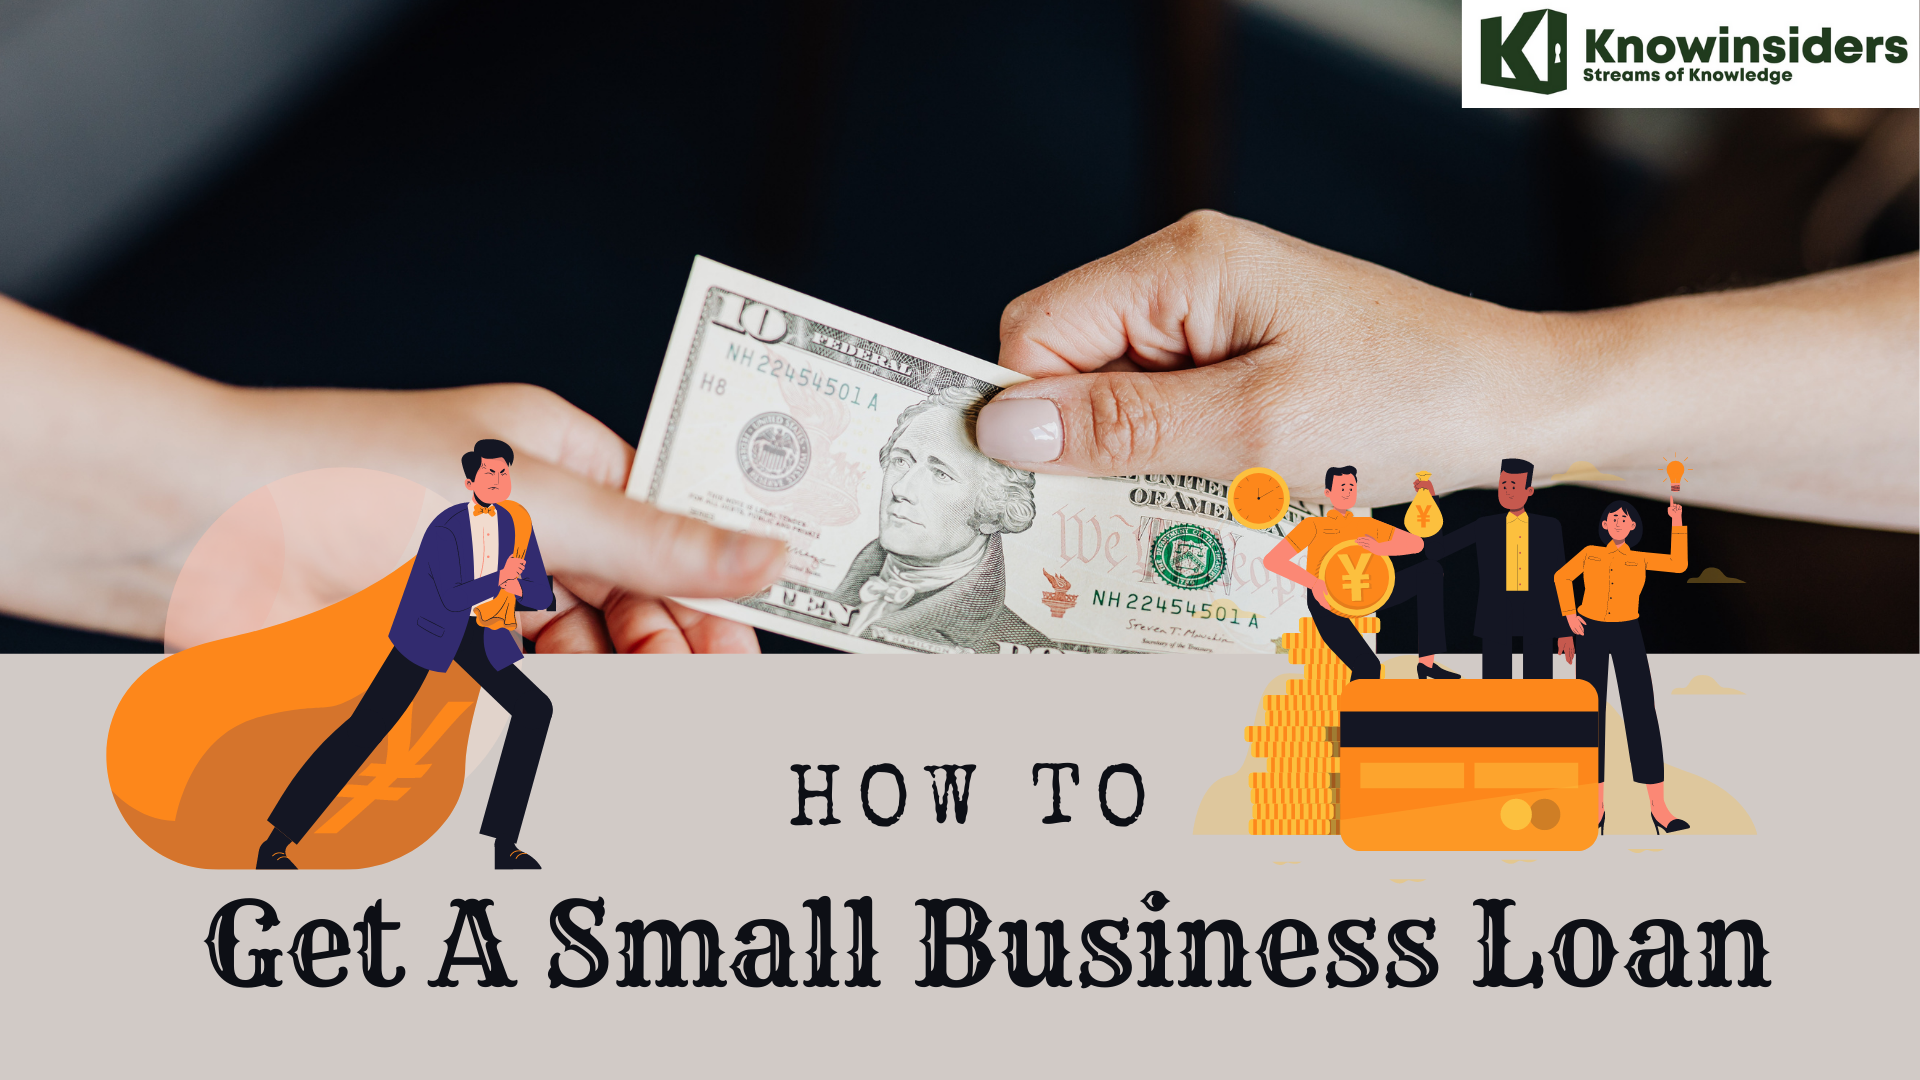 How To Get A Small Business Loan: Best Tips for Startup Success